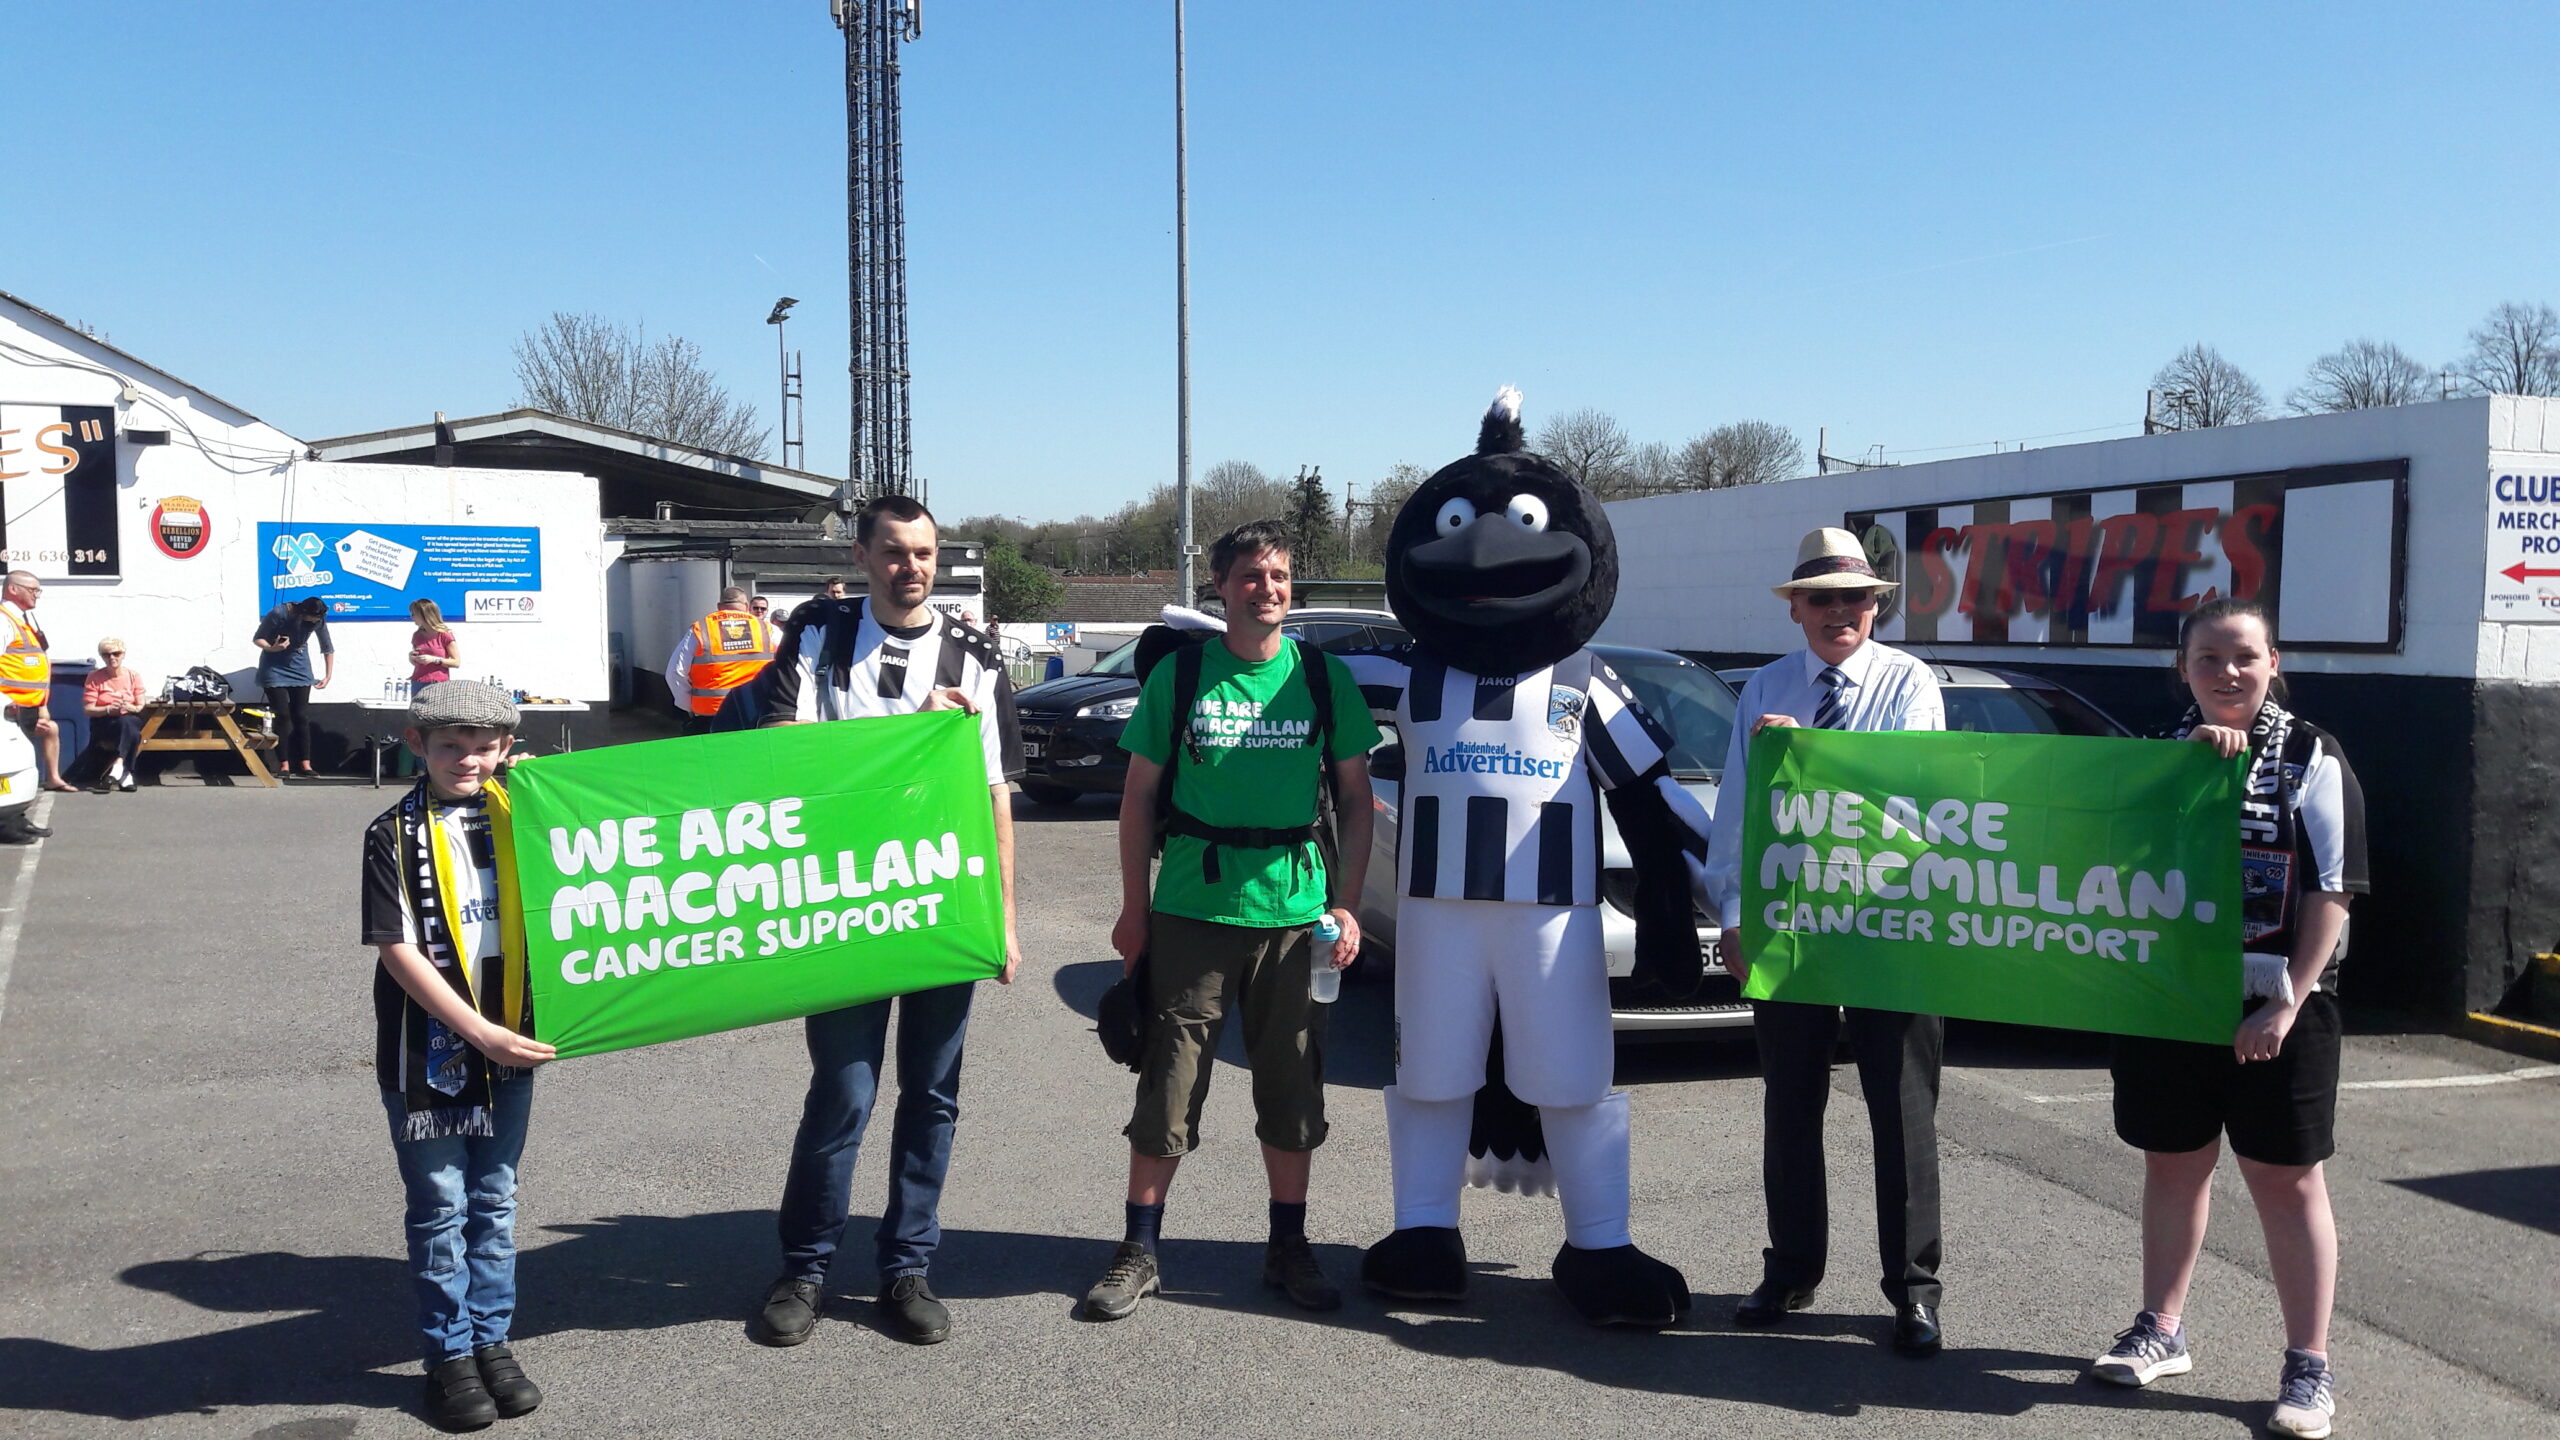 A photo of Sarah's husband, the 7 foot magpie mascot and other supporters outside the ground at the end of his charity challenge